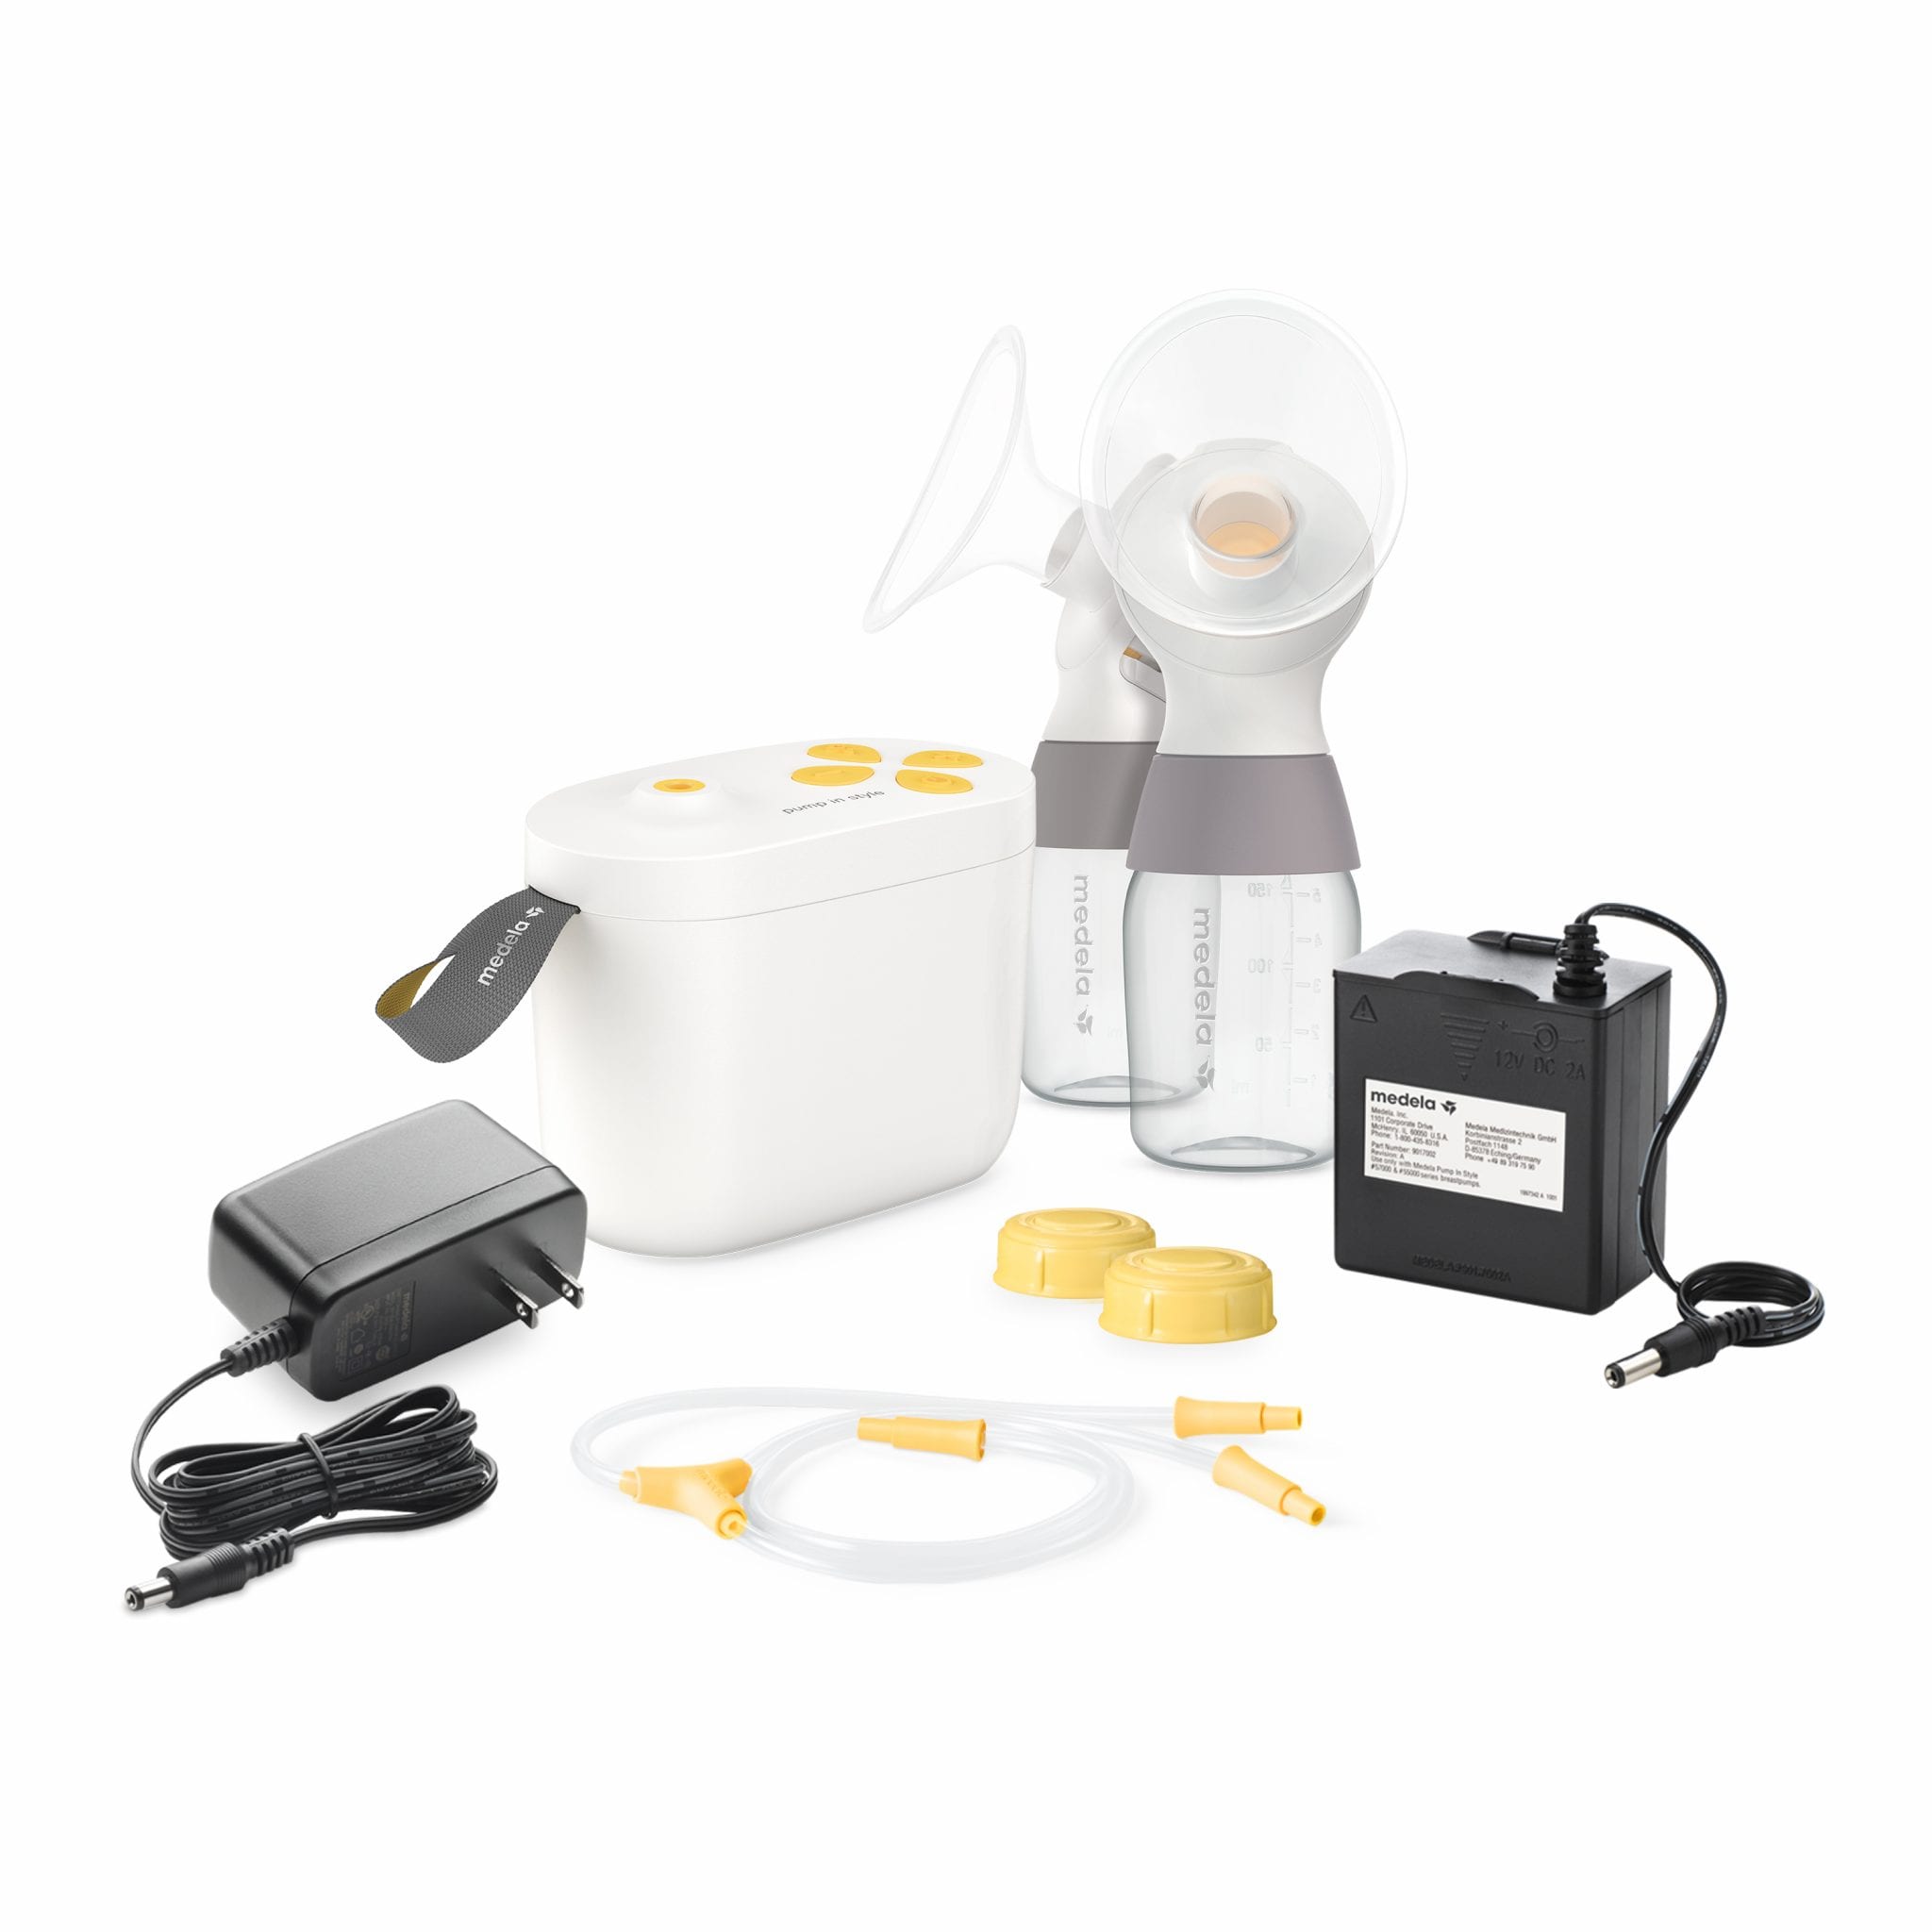 Medela Pump In Style With Max Flow Pumping Essentials, 40% OFF